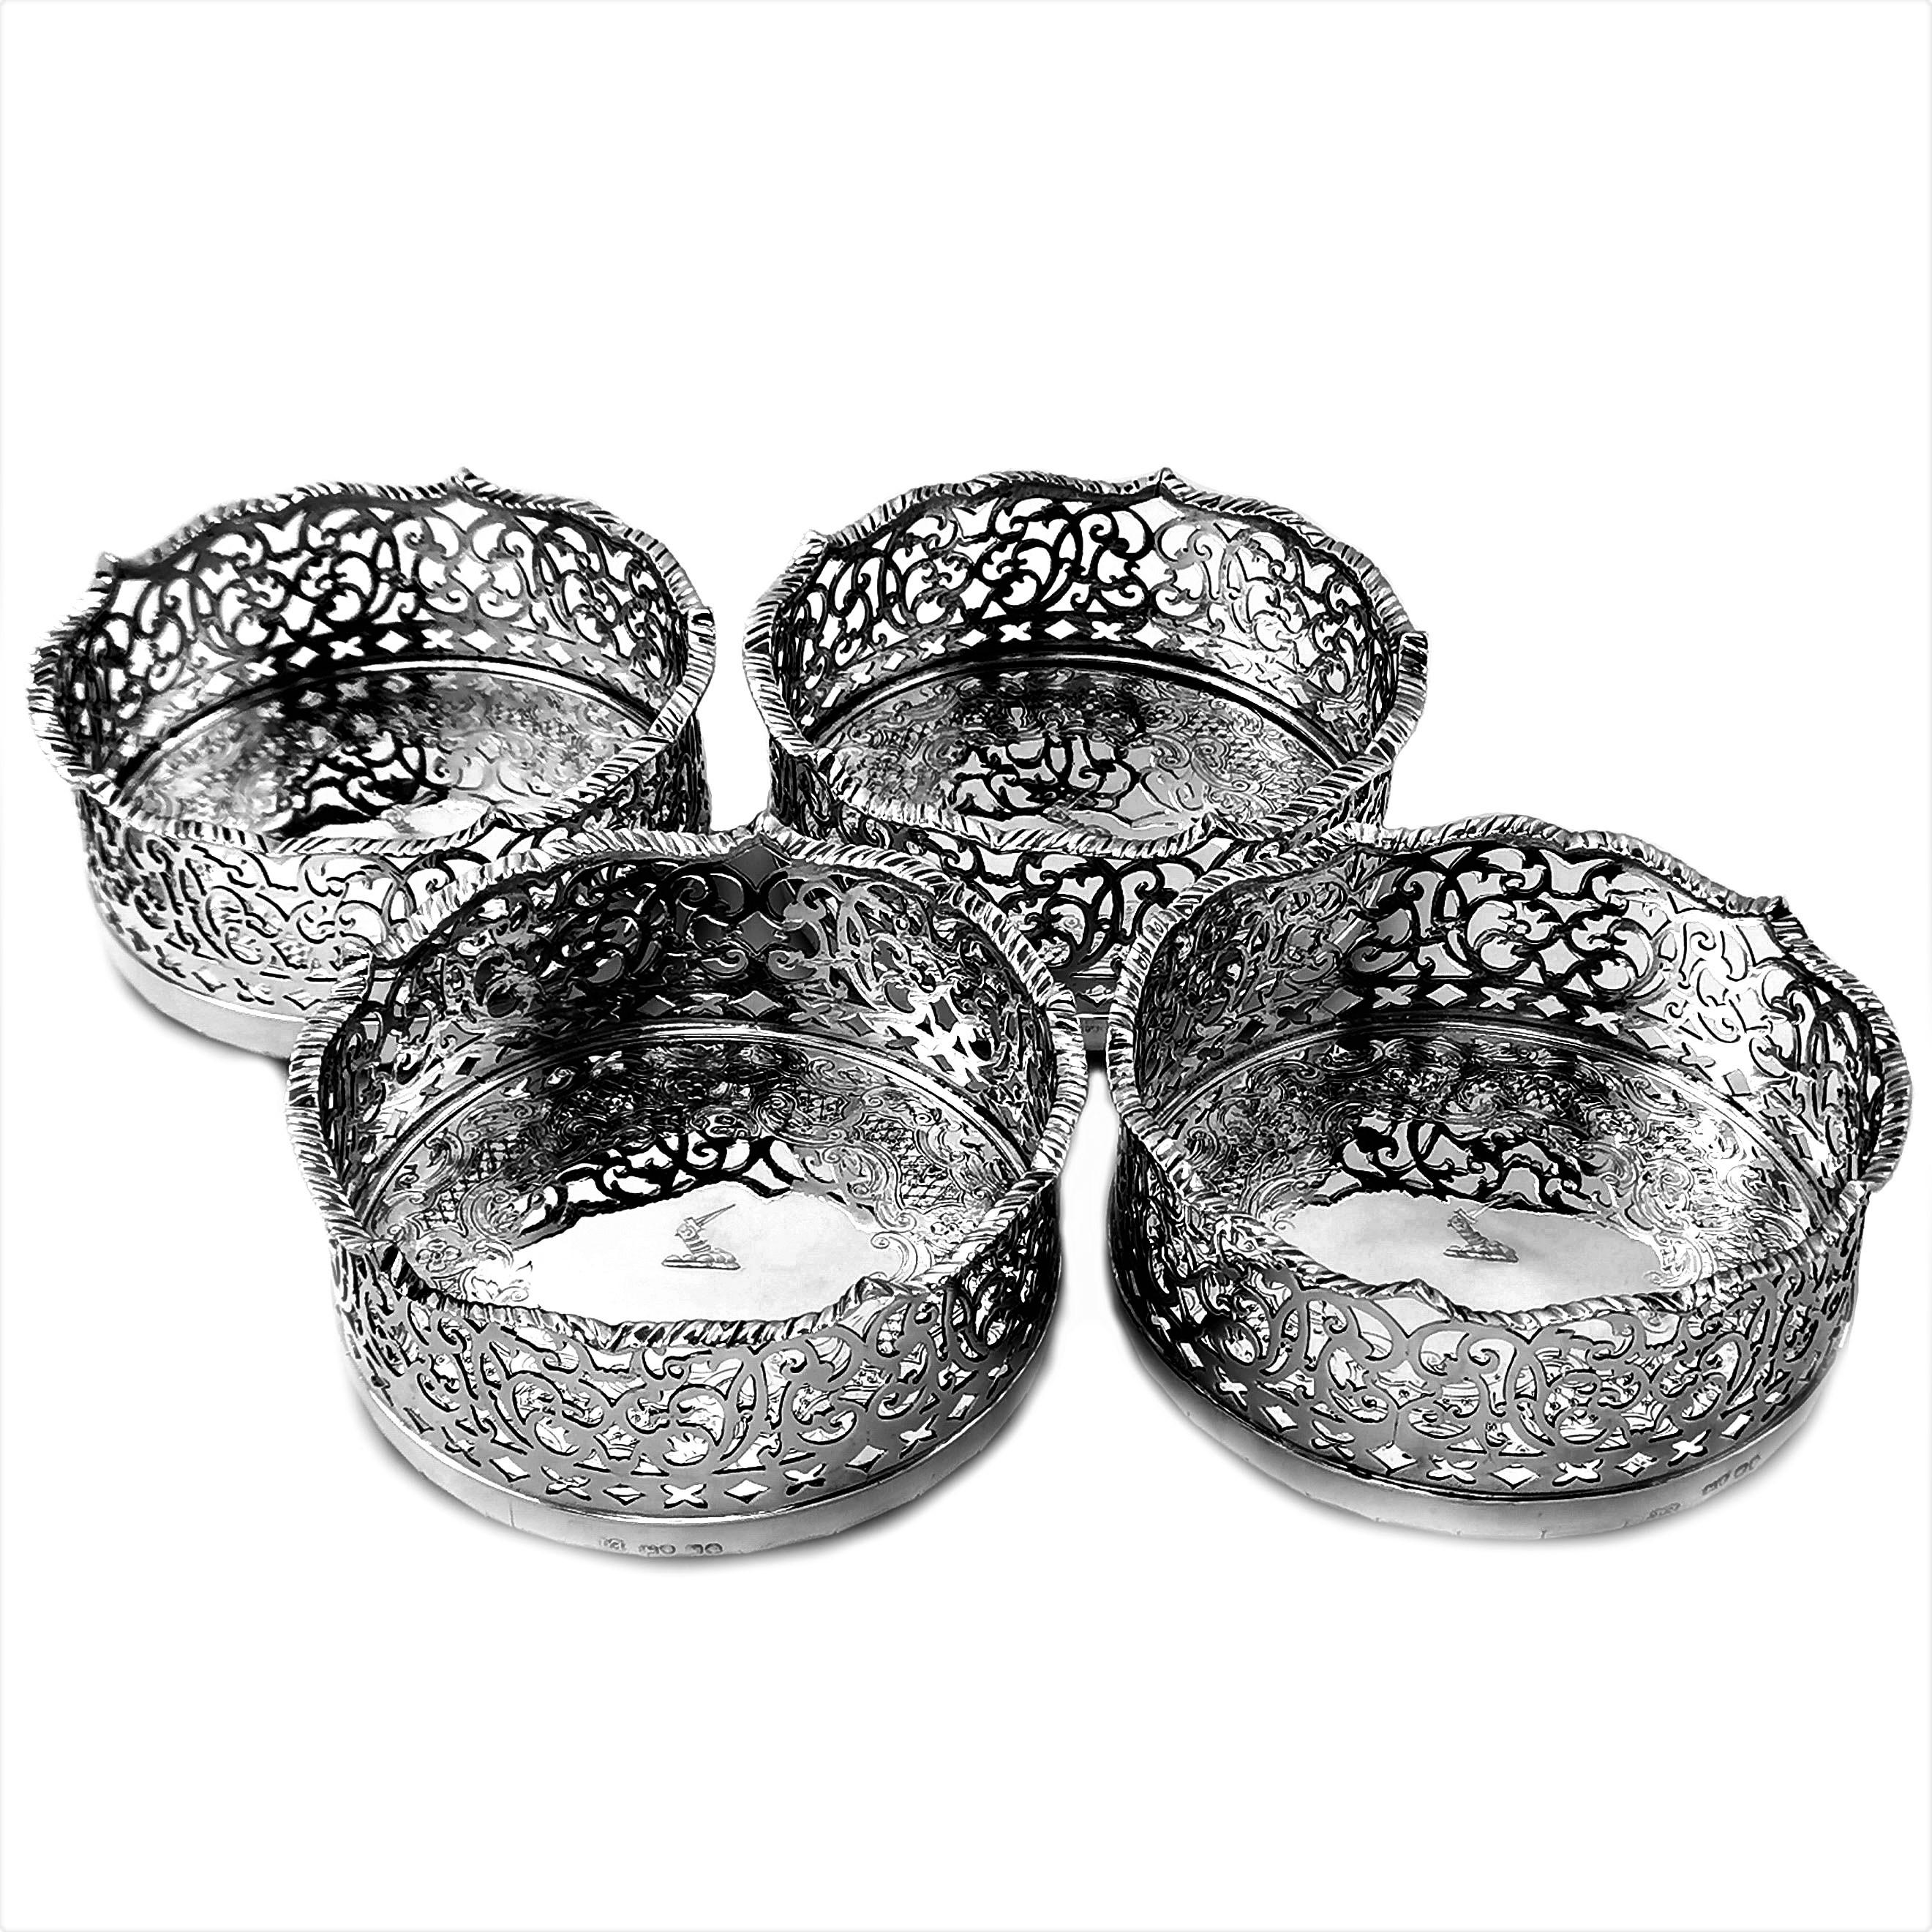 19th Century Set of 4 Antique Victorian Sterling Silver Wine Bottle Coasters, 1840